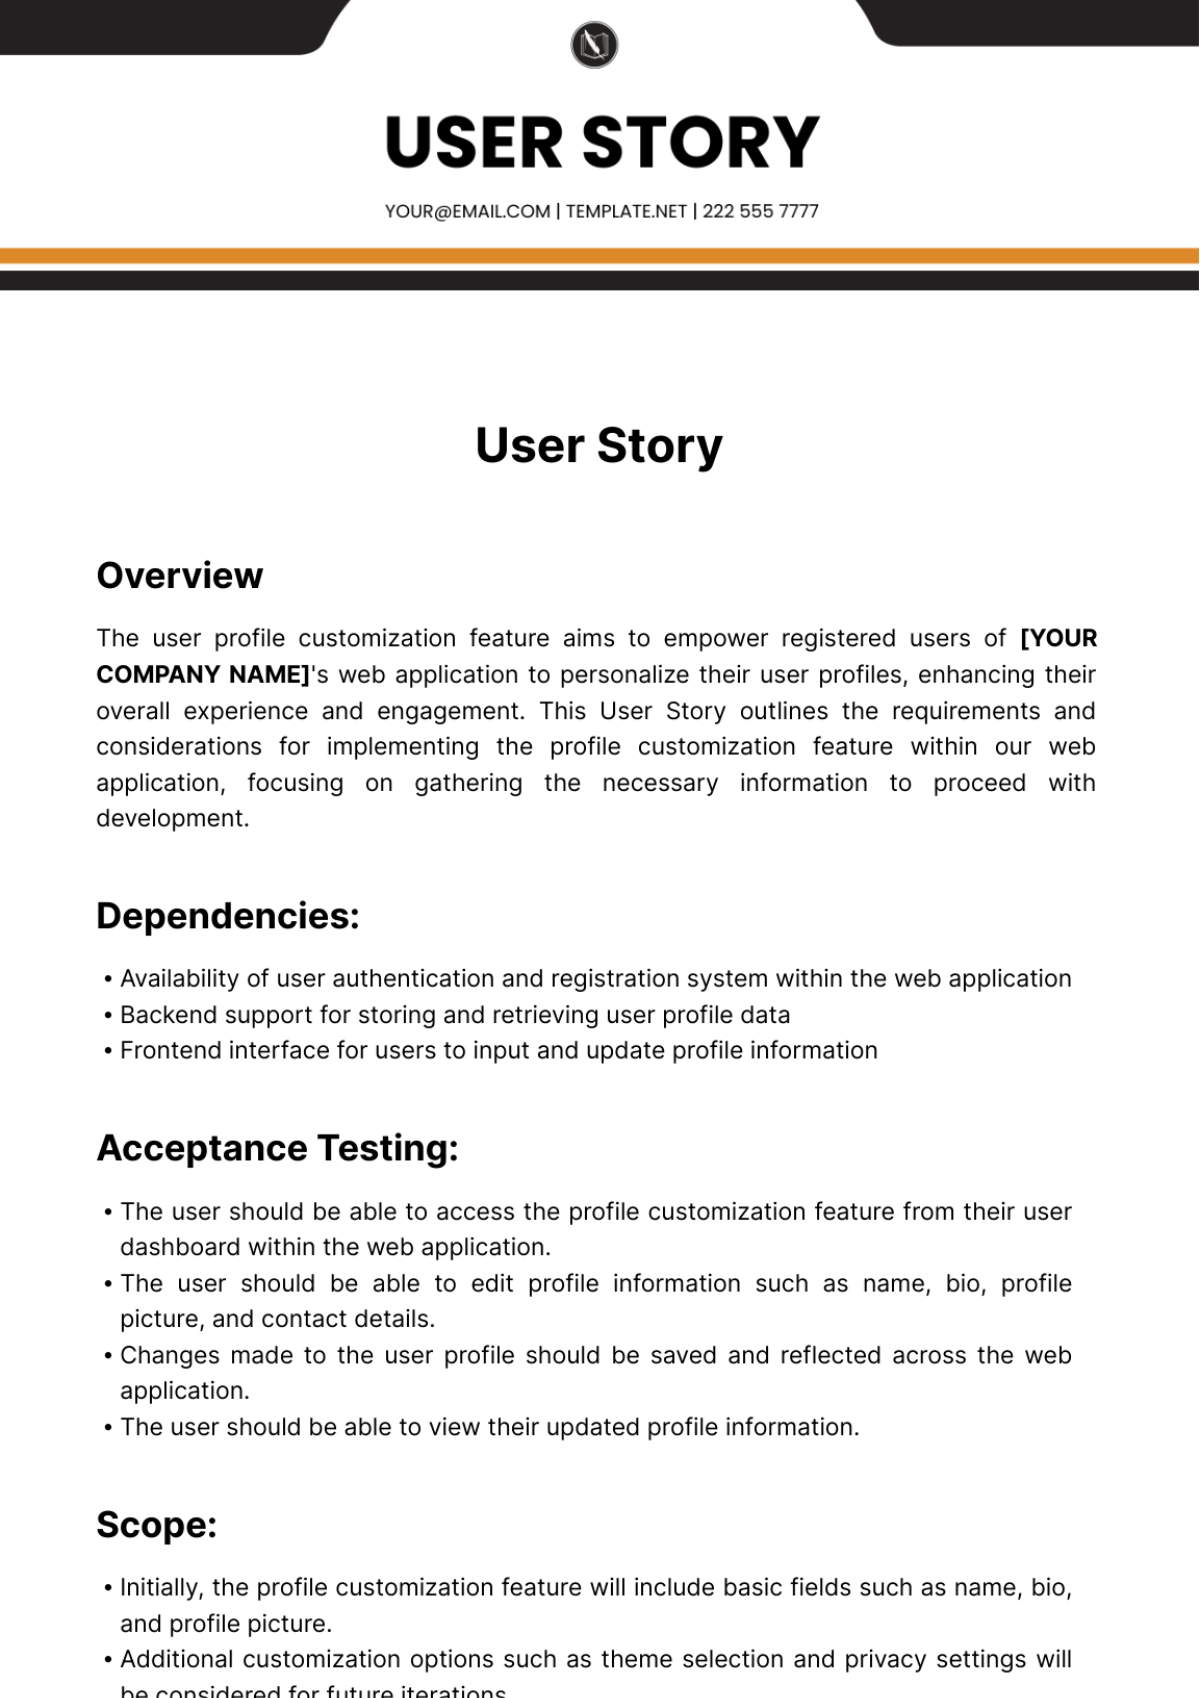 User Story Template